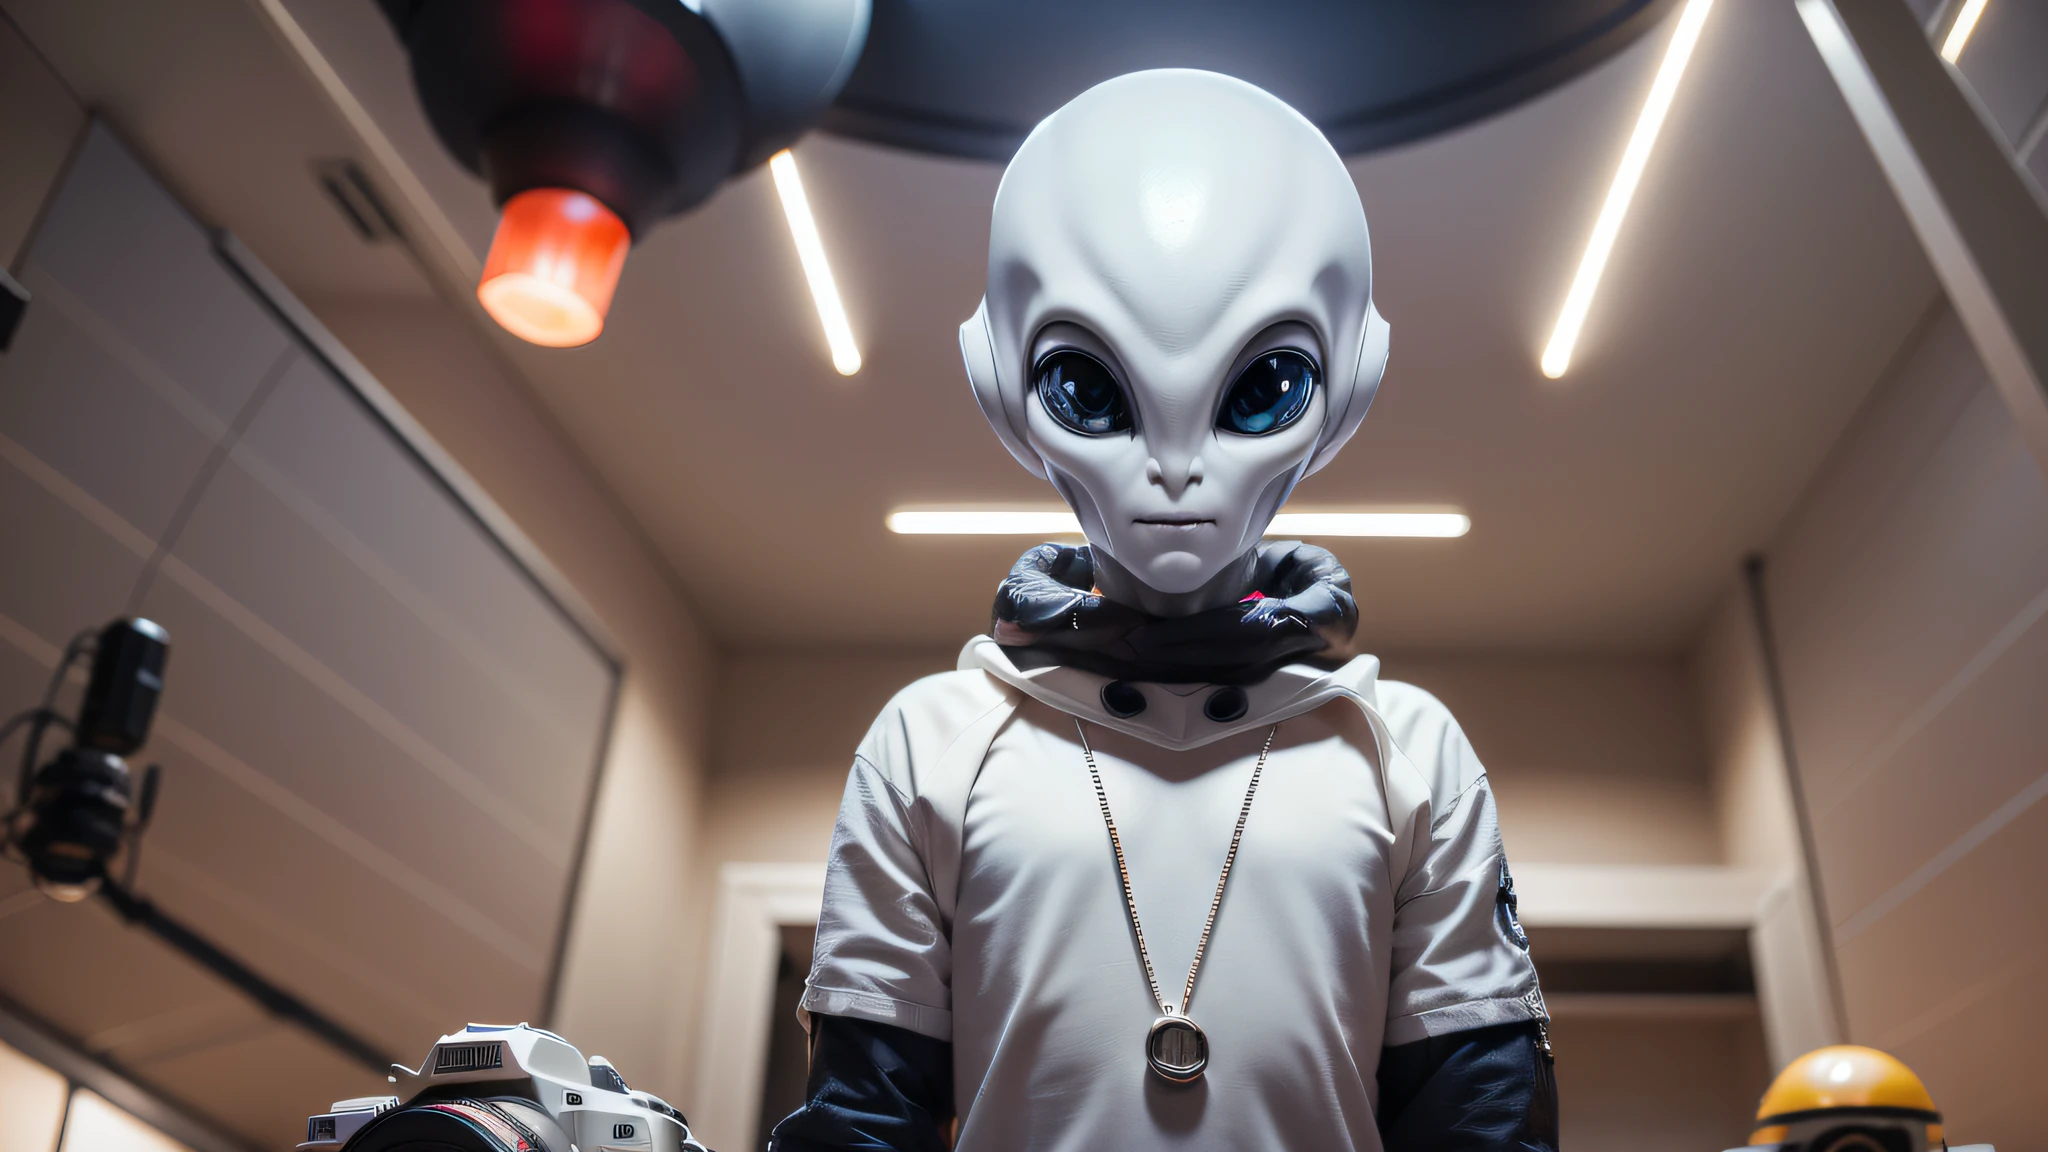 An alien, with albino and realistic skin, large head, short and thin neck, very large eyes and all black, which reflects the local lighting, a nose similar to that of humans but small, a mouth similar to that of humans but small, the body is thin and thin, the alien wears a white sleeve shirt with a letter made of small silver that appears to the right represented within a triangle of the same size, the clothing is inspired by the clothes used for surfing, the color to be used is red, pink chock and blue, as well as details of the environment, and manufactured with neoprene fabric, it is possible to notice a silver necklace hanging from his neck, with a pinjente in the triangular shape with an eye that sees everything in the center as a symbol. the alien is in a recording studio whose scenery is minimalist and features a gray background in gradient hue to circular white, the camera captures the image from the waist up, the alien presents friendly and light expressions, the alien interact with the camera always with a slight smile of satisfaction and tranquility,  The skin used and all the elements are of extreme realism, especially the skins, the lighting is an illumination inspired by the 80s.